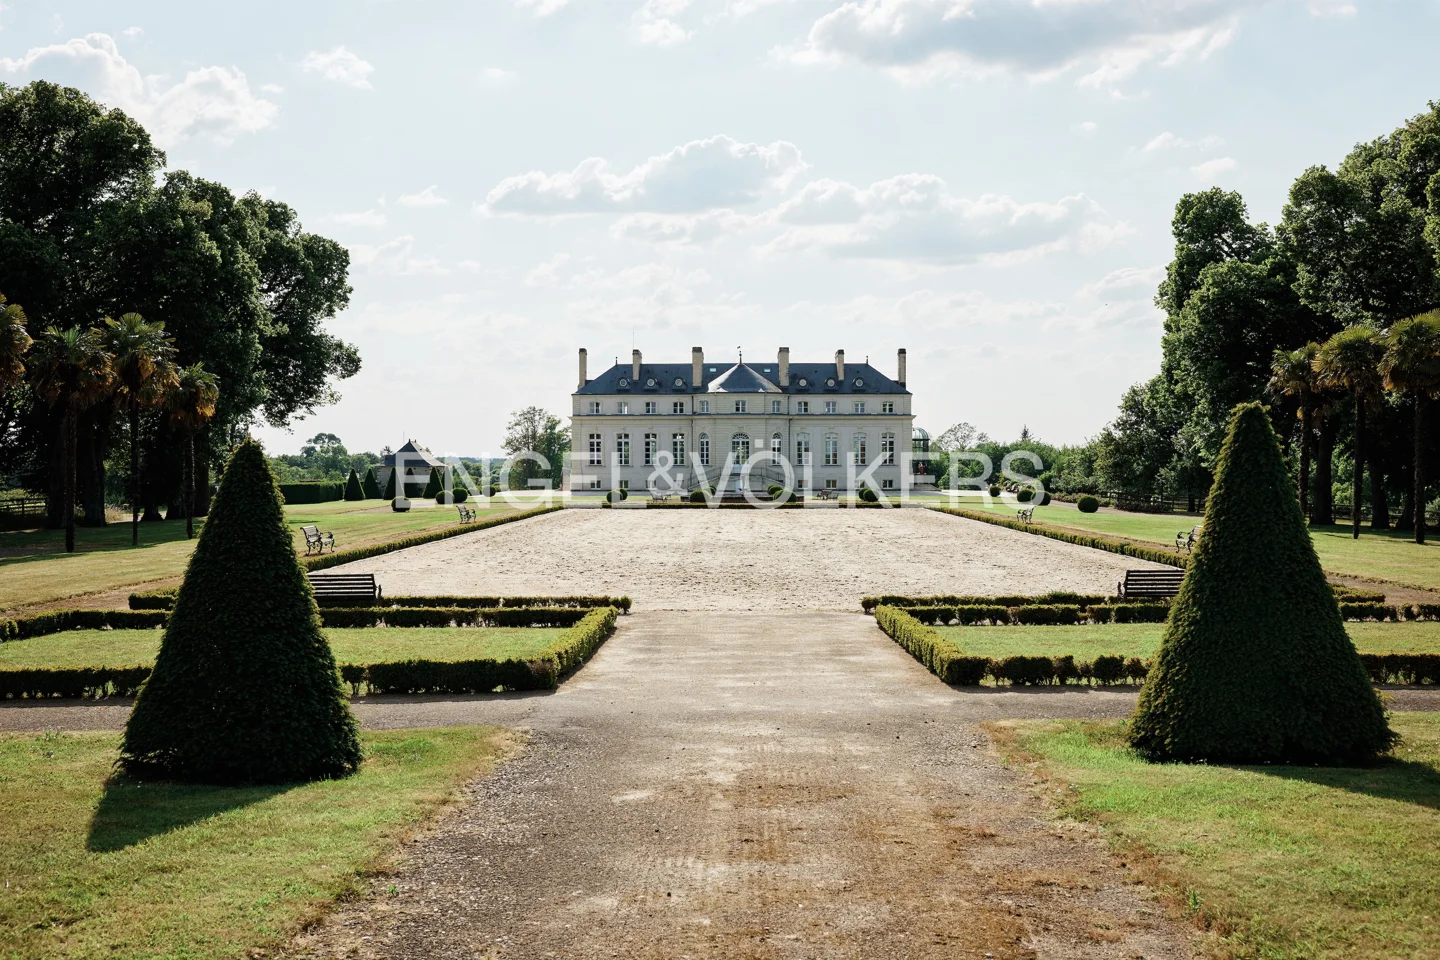 Exceptional Stud Farm and its sublime Chateau